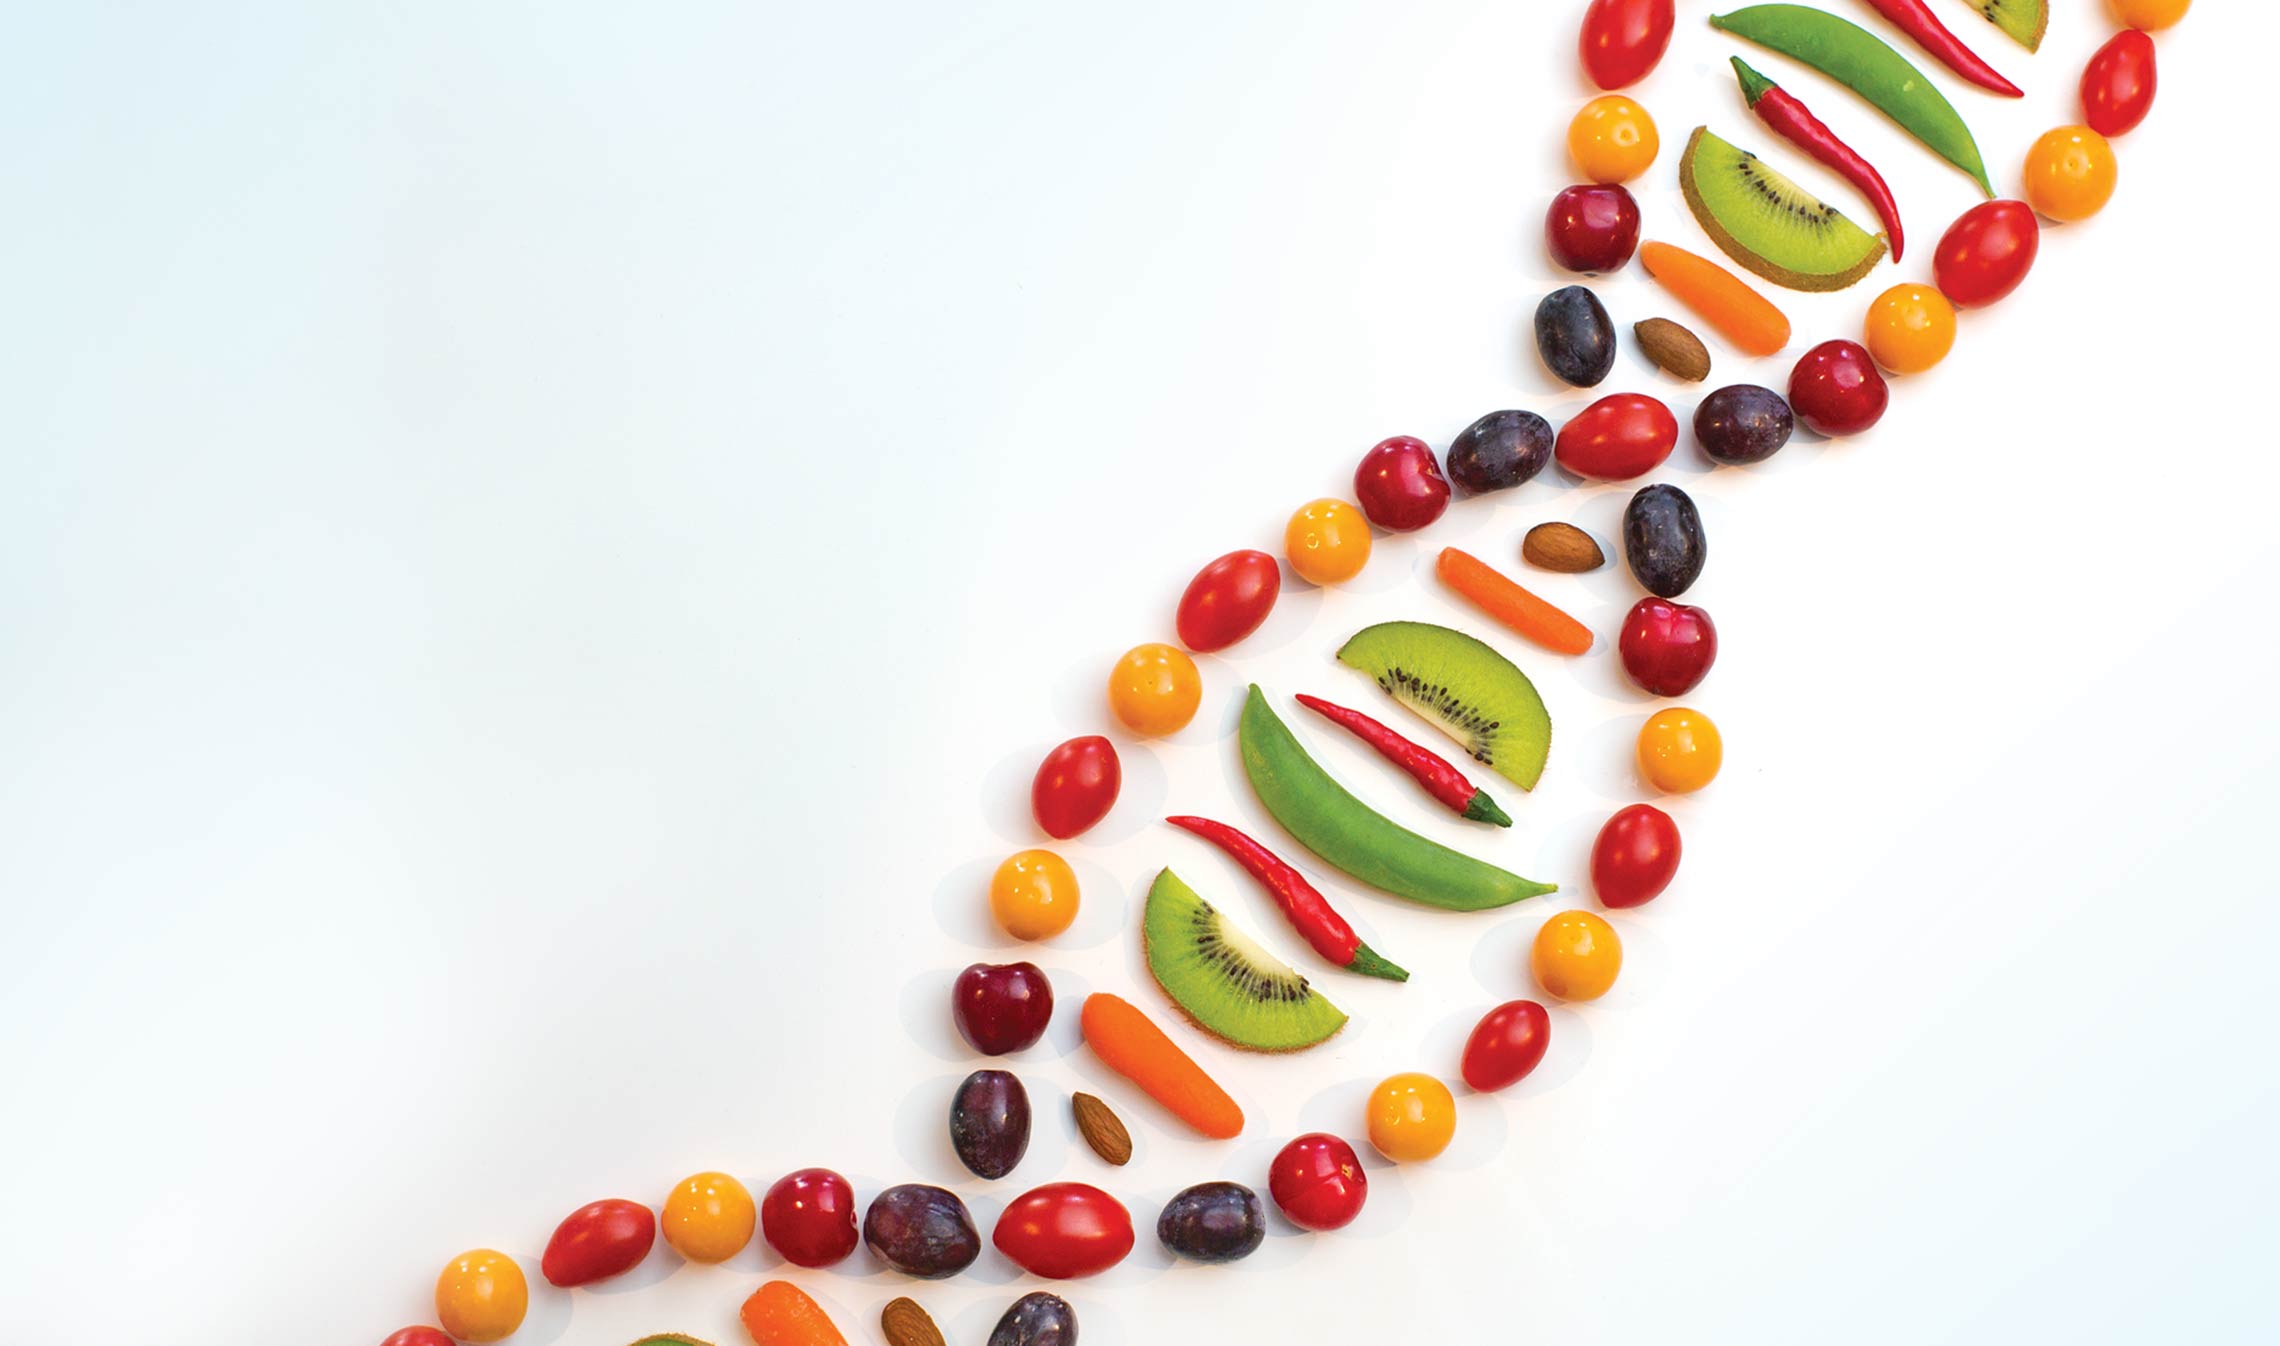 SHOULD YOUR DNA DETERMINE WHAT'S FOR DINNER?